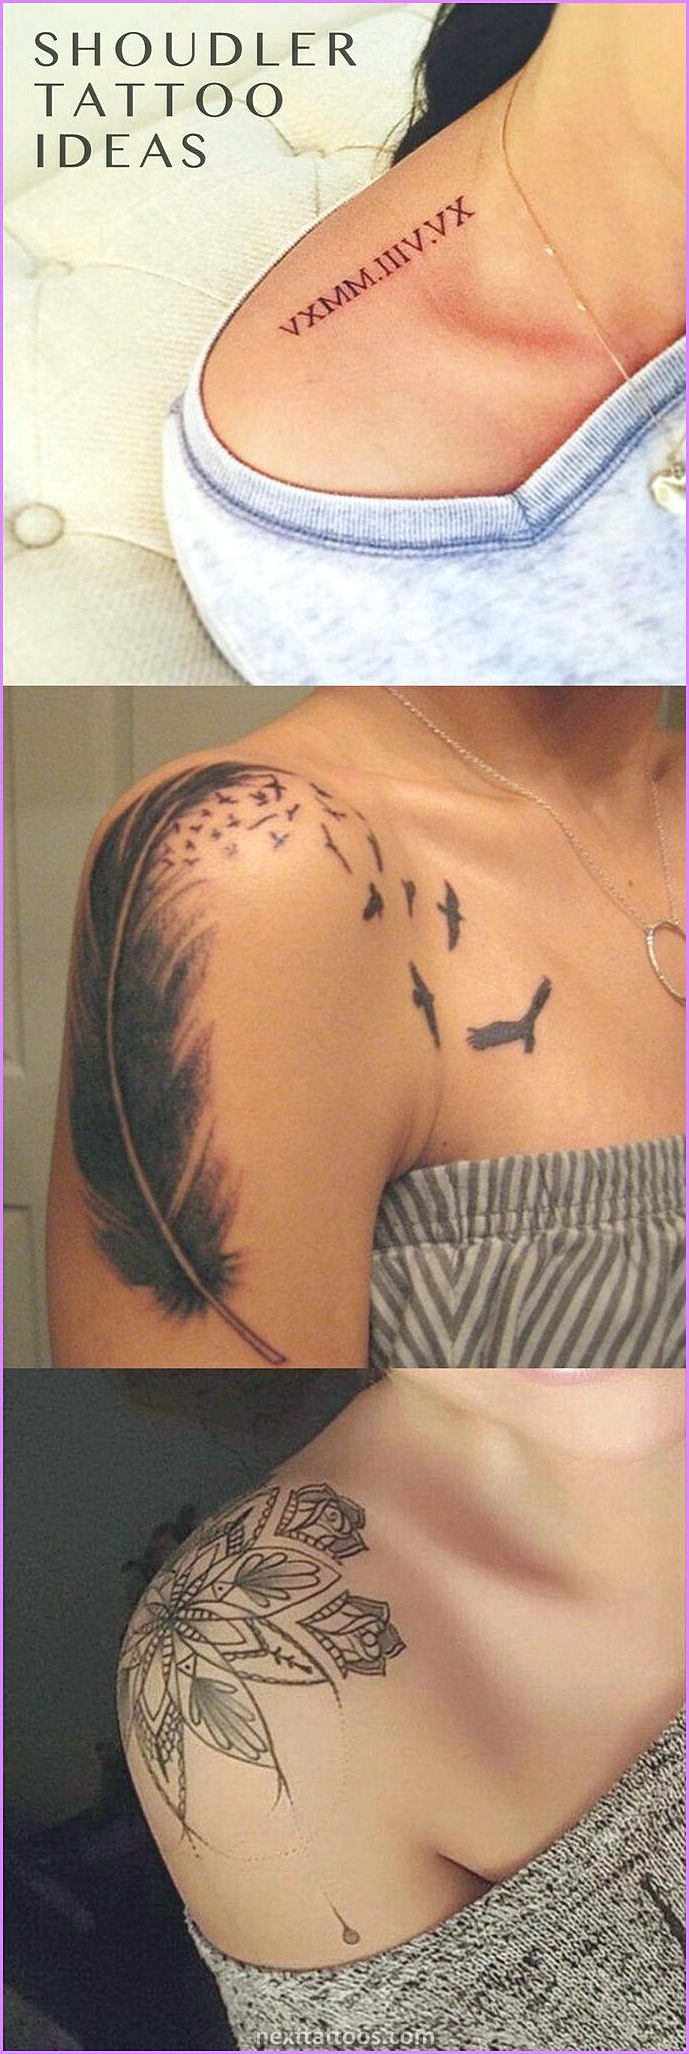 Shoulder Tattoo Ideas For Women and Men